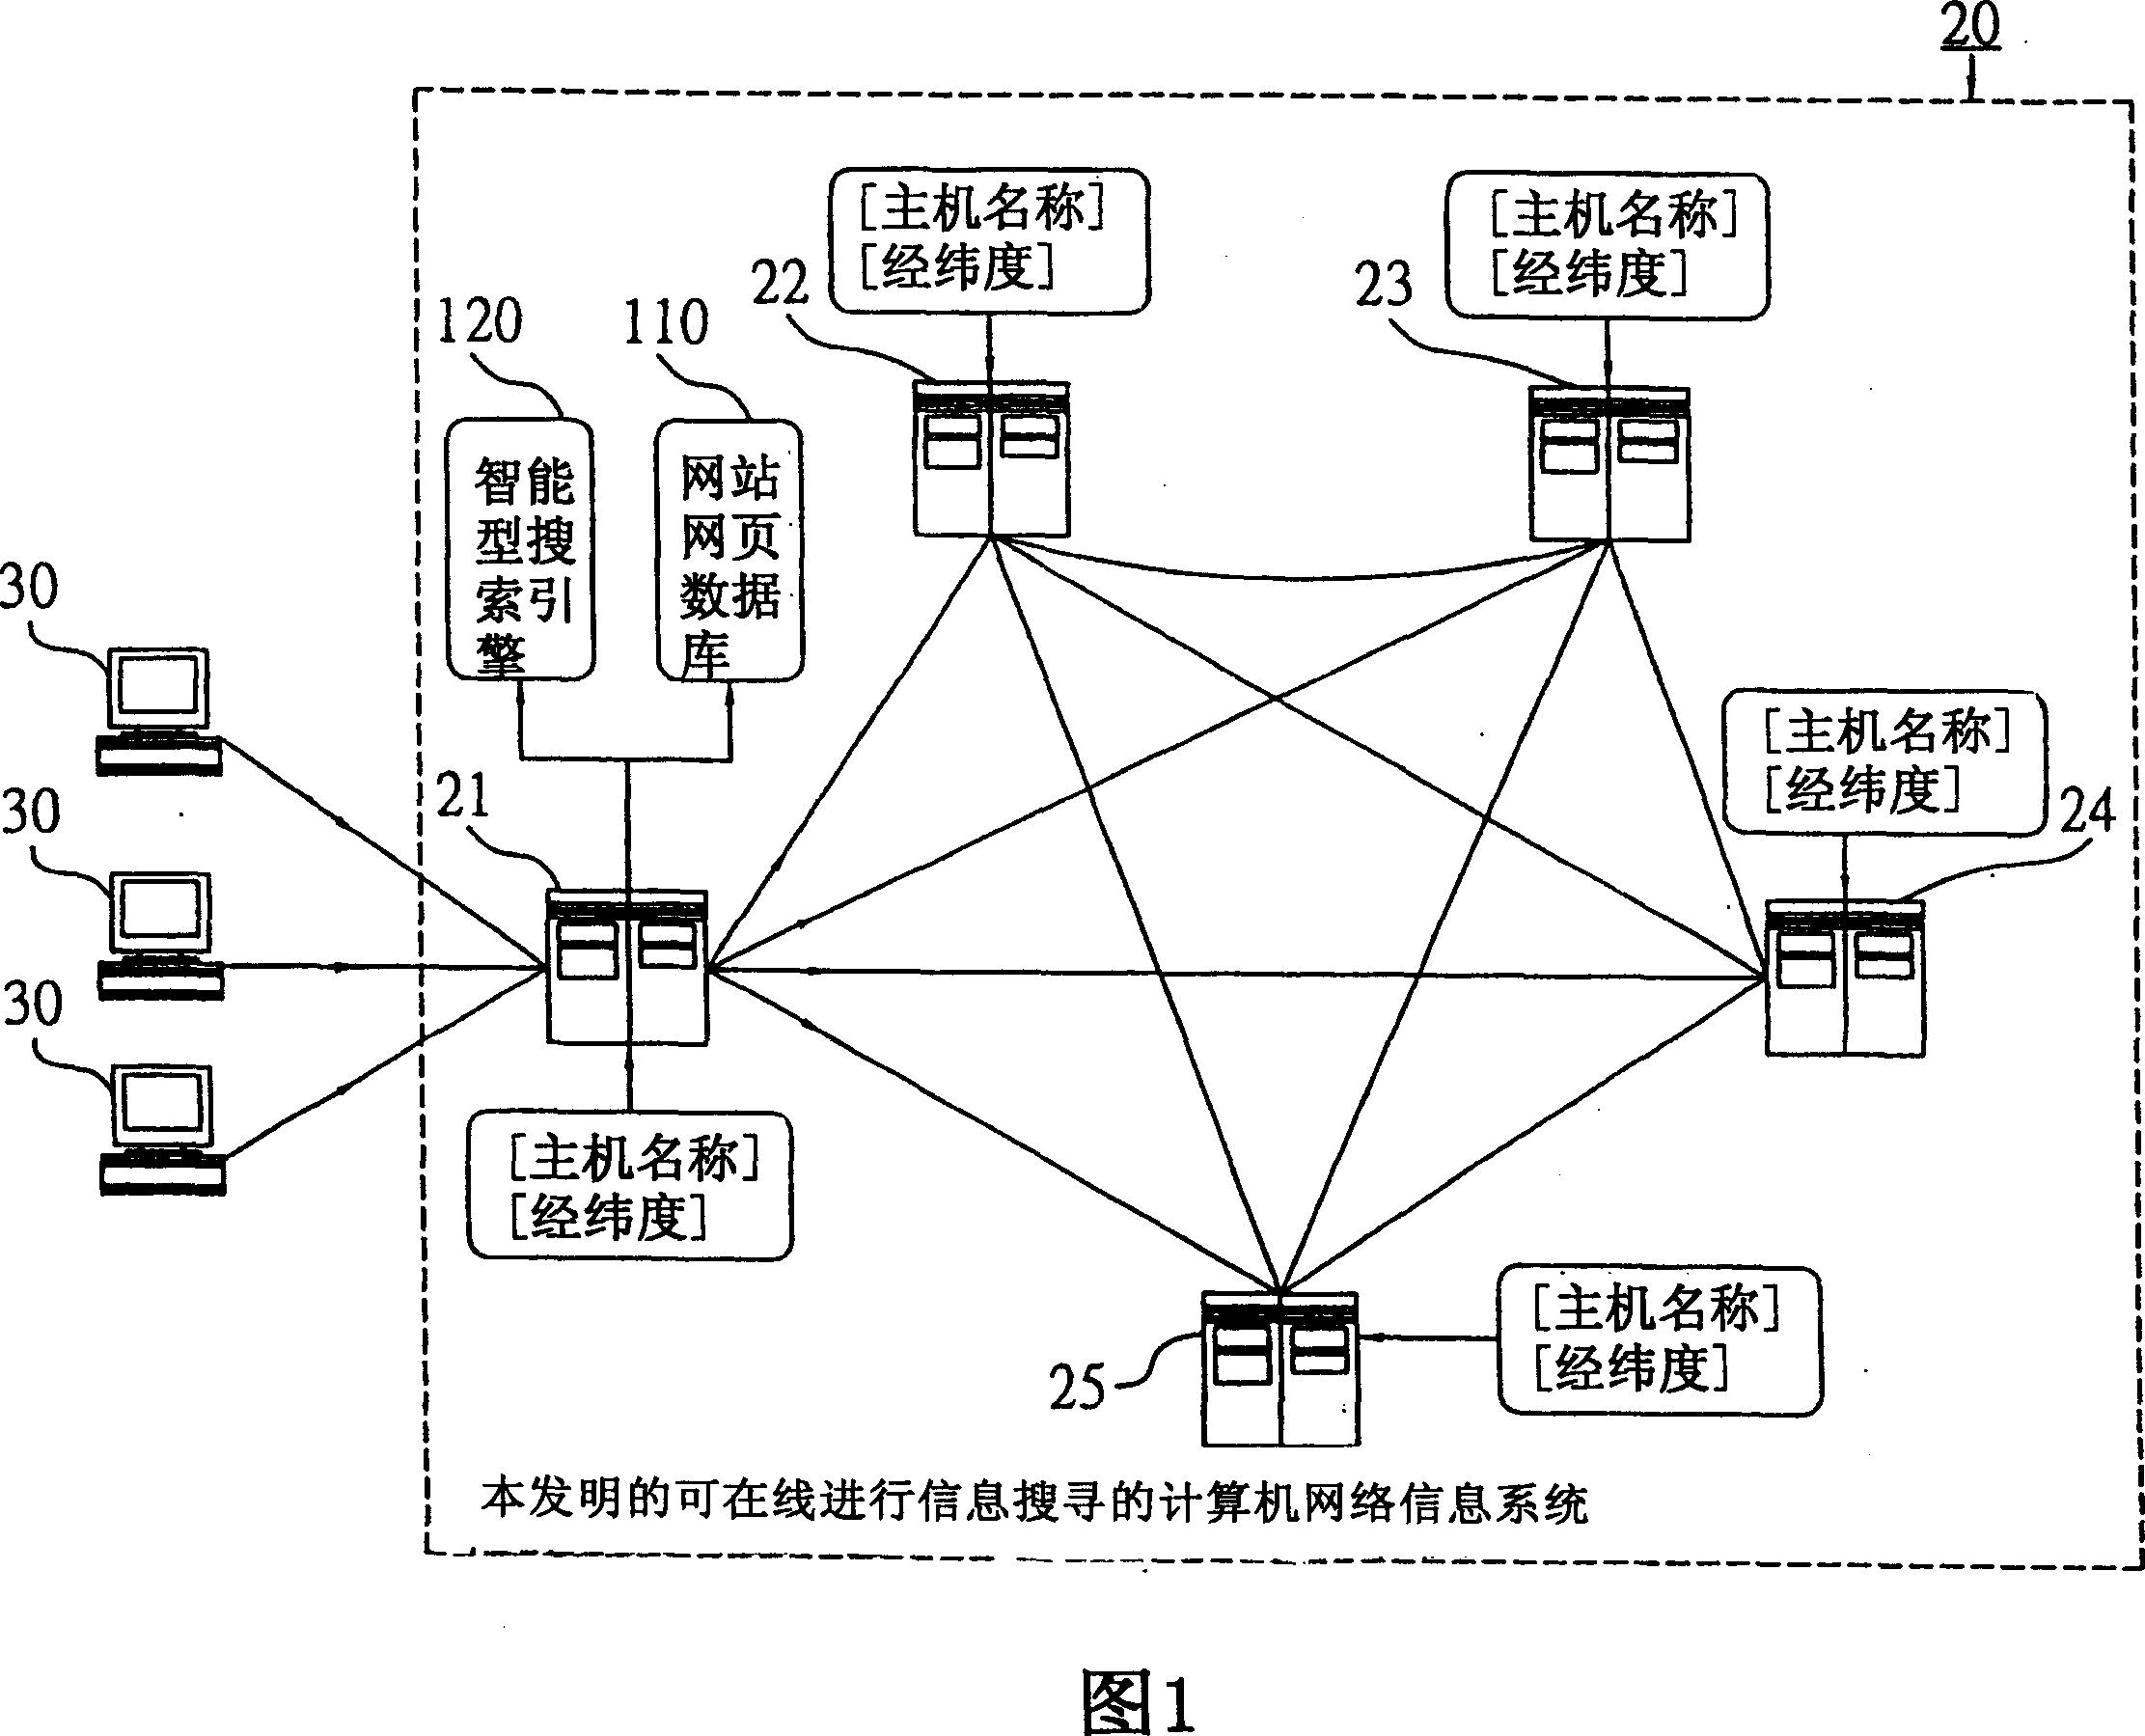 Computer network information system possessing intelligent type online information searching function as well as improving linking efficiency between network nodes